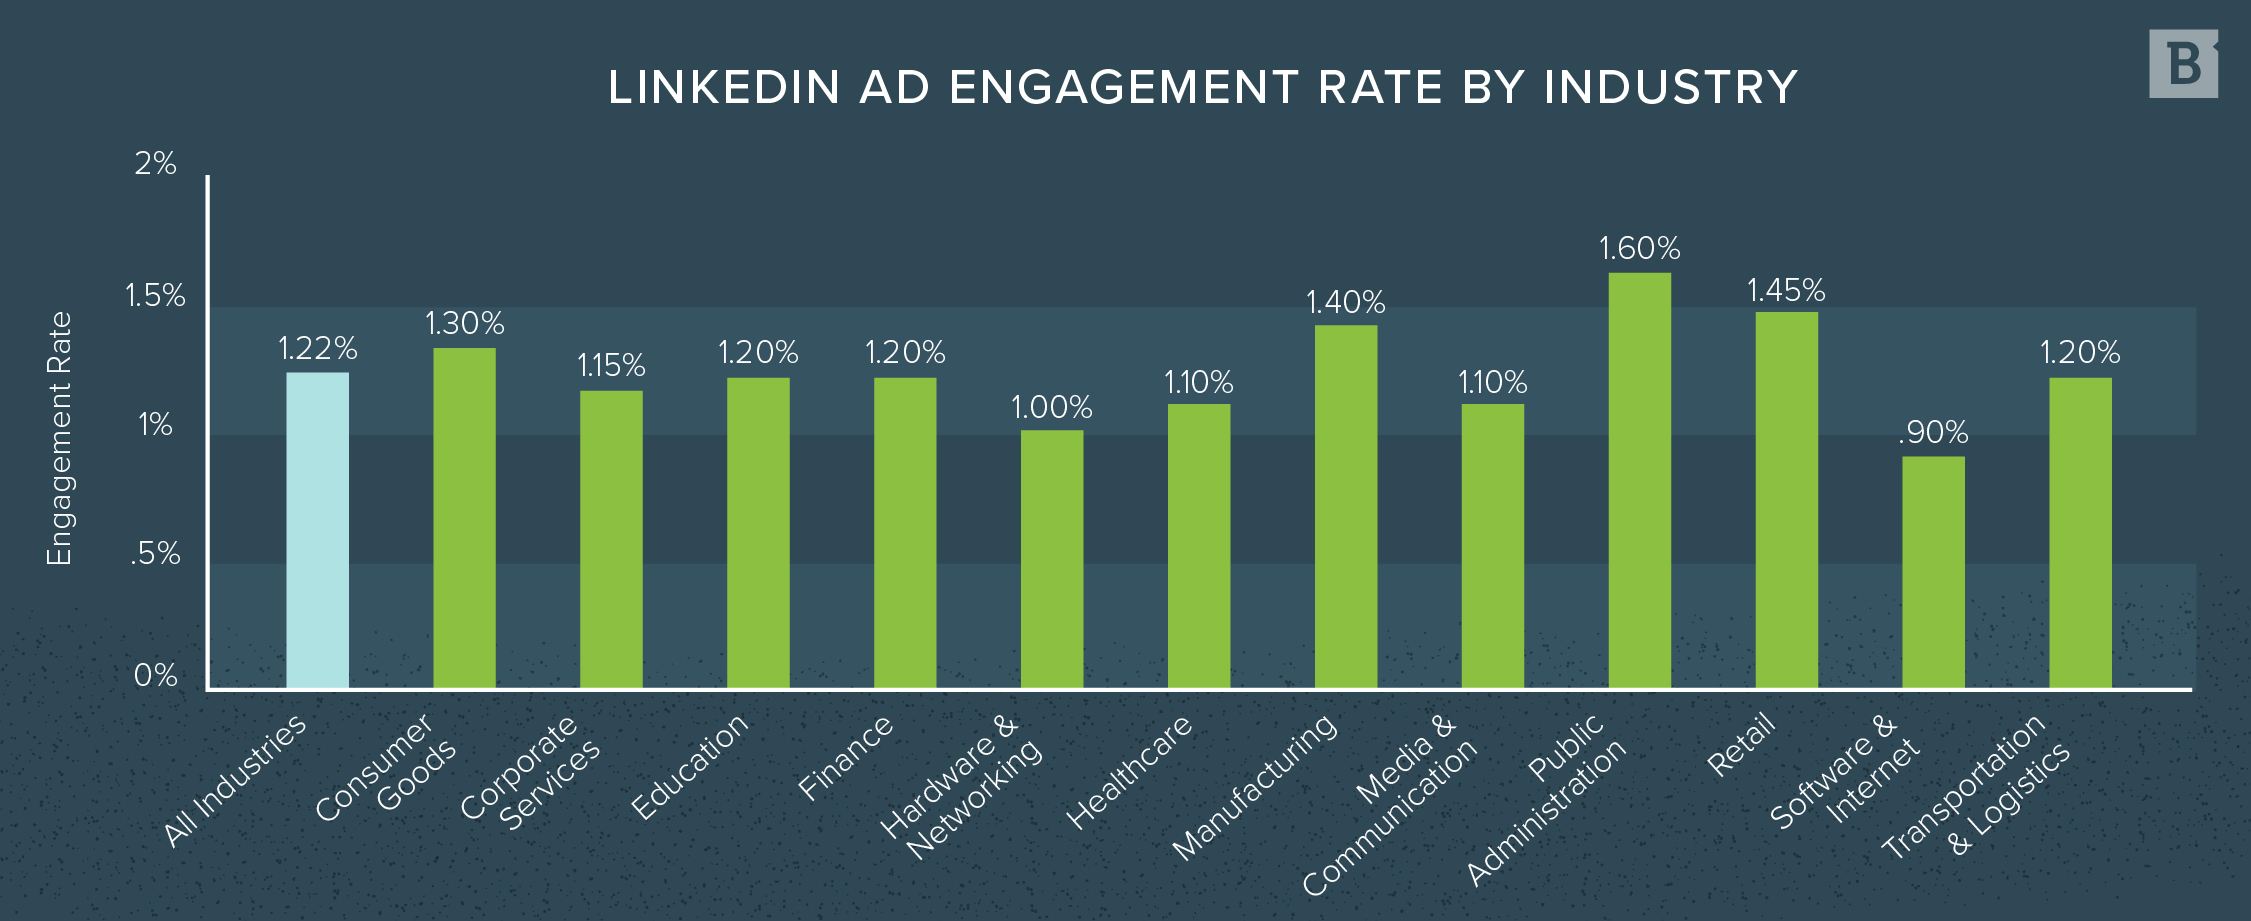 LinkedIn ad engagement rate by industry